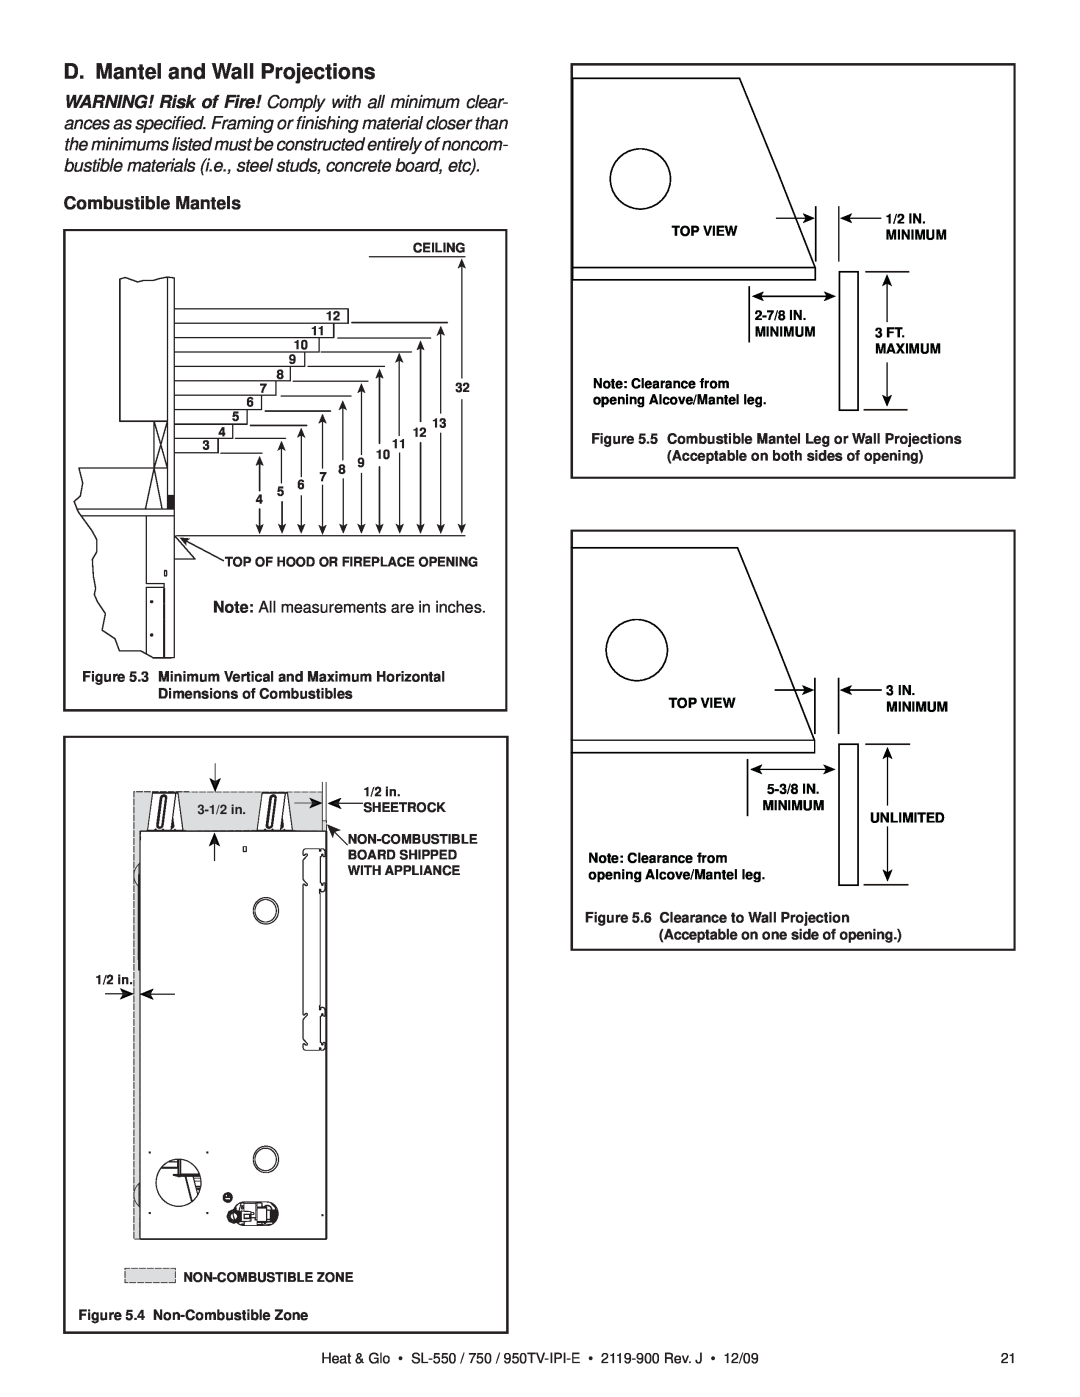 Heat & Glo LifeStyle SL-950TV-IPI-E owner manual D. Mantel and Wall Projections, Combustible Mantels, 4 Non-CombustibleZone 